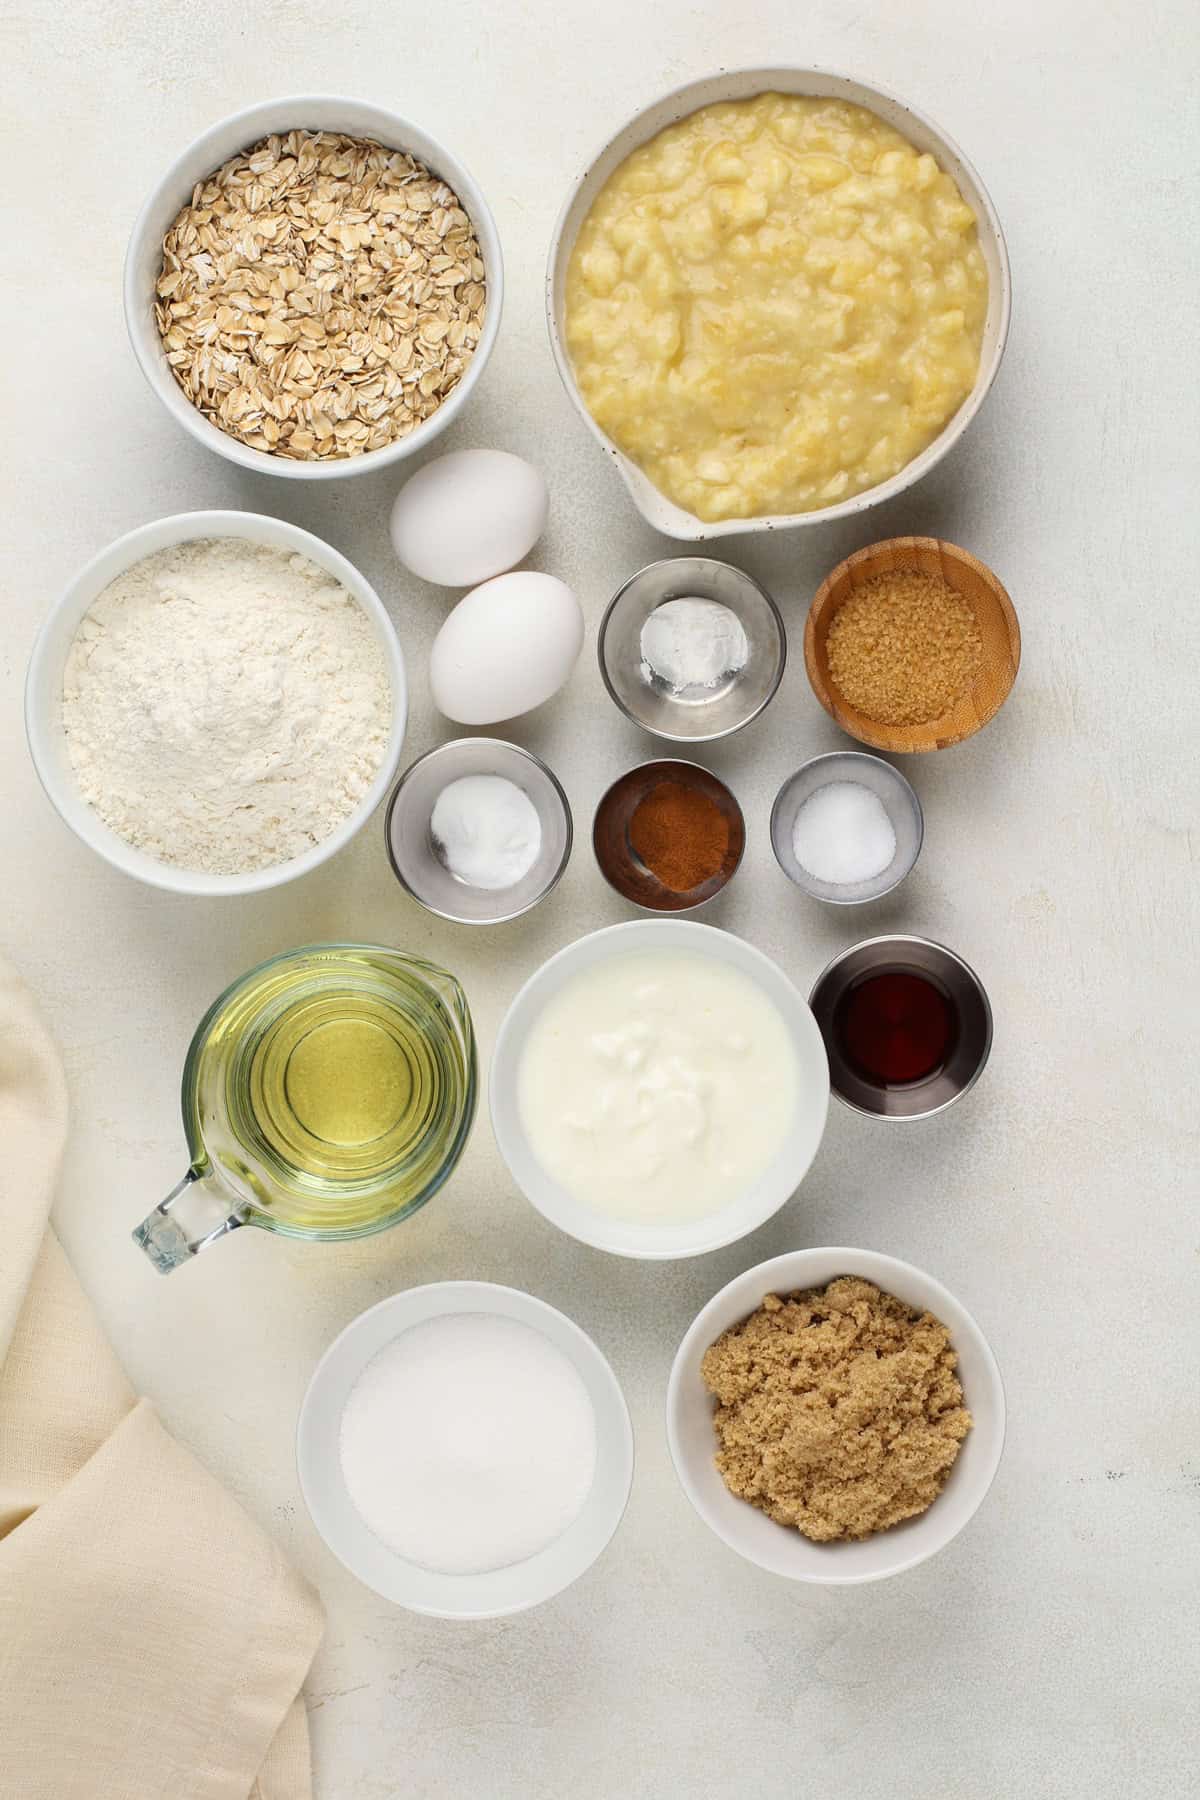 Ingredients for oatmeal banana bread arranged on a light-colored countertop.